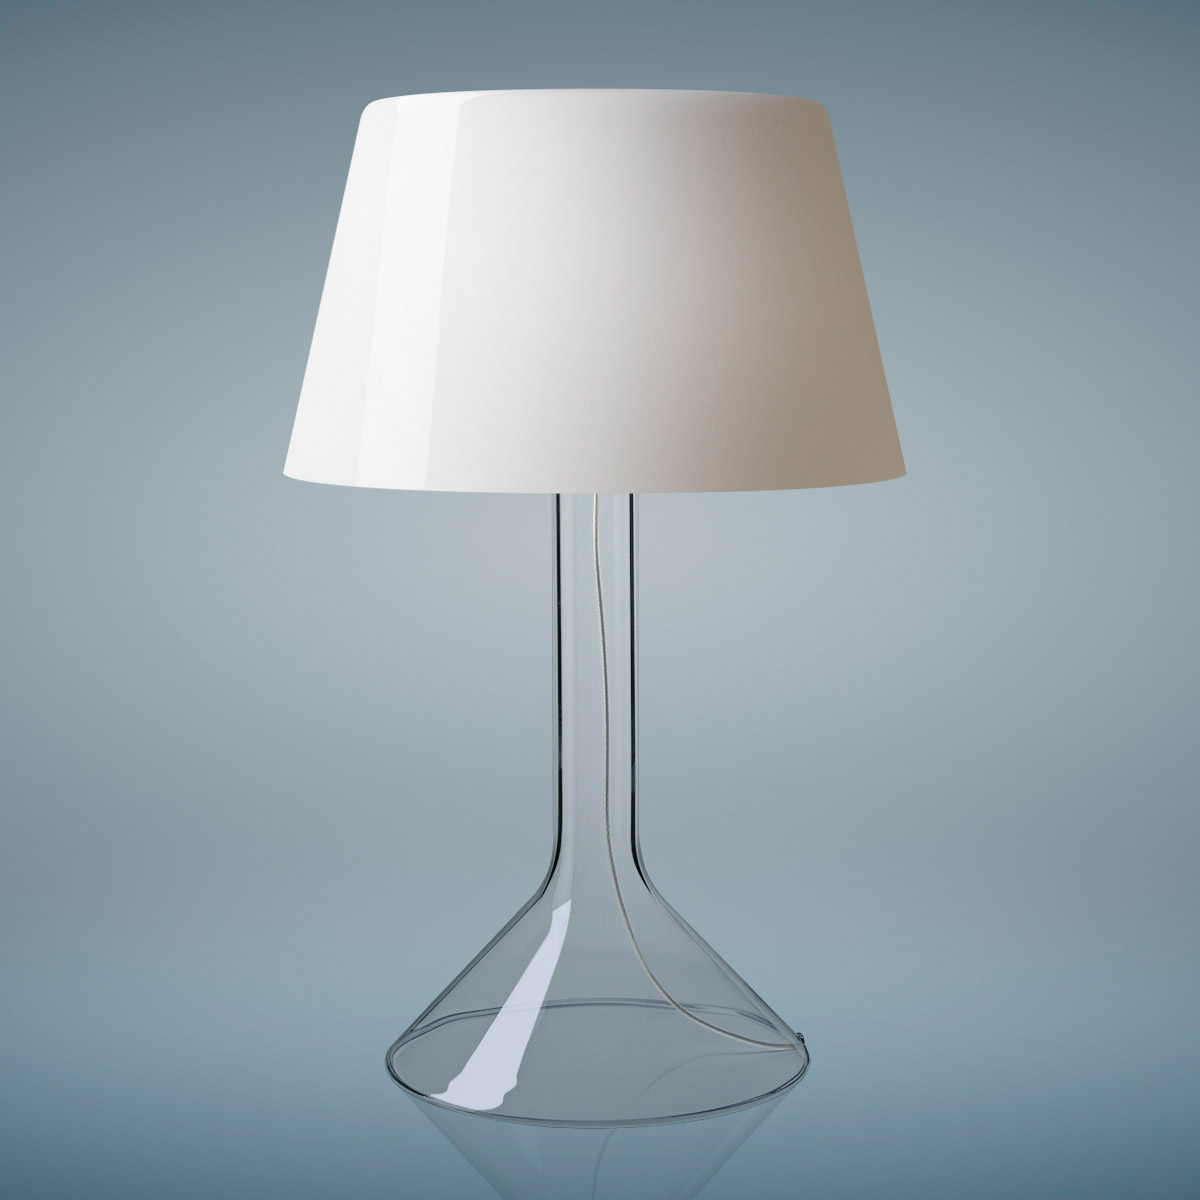 Chapeaux V glass table lamp by Foscarini